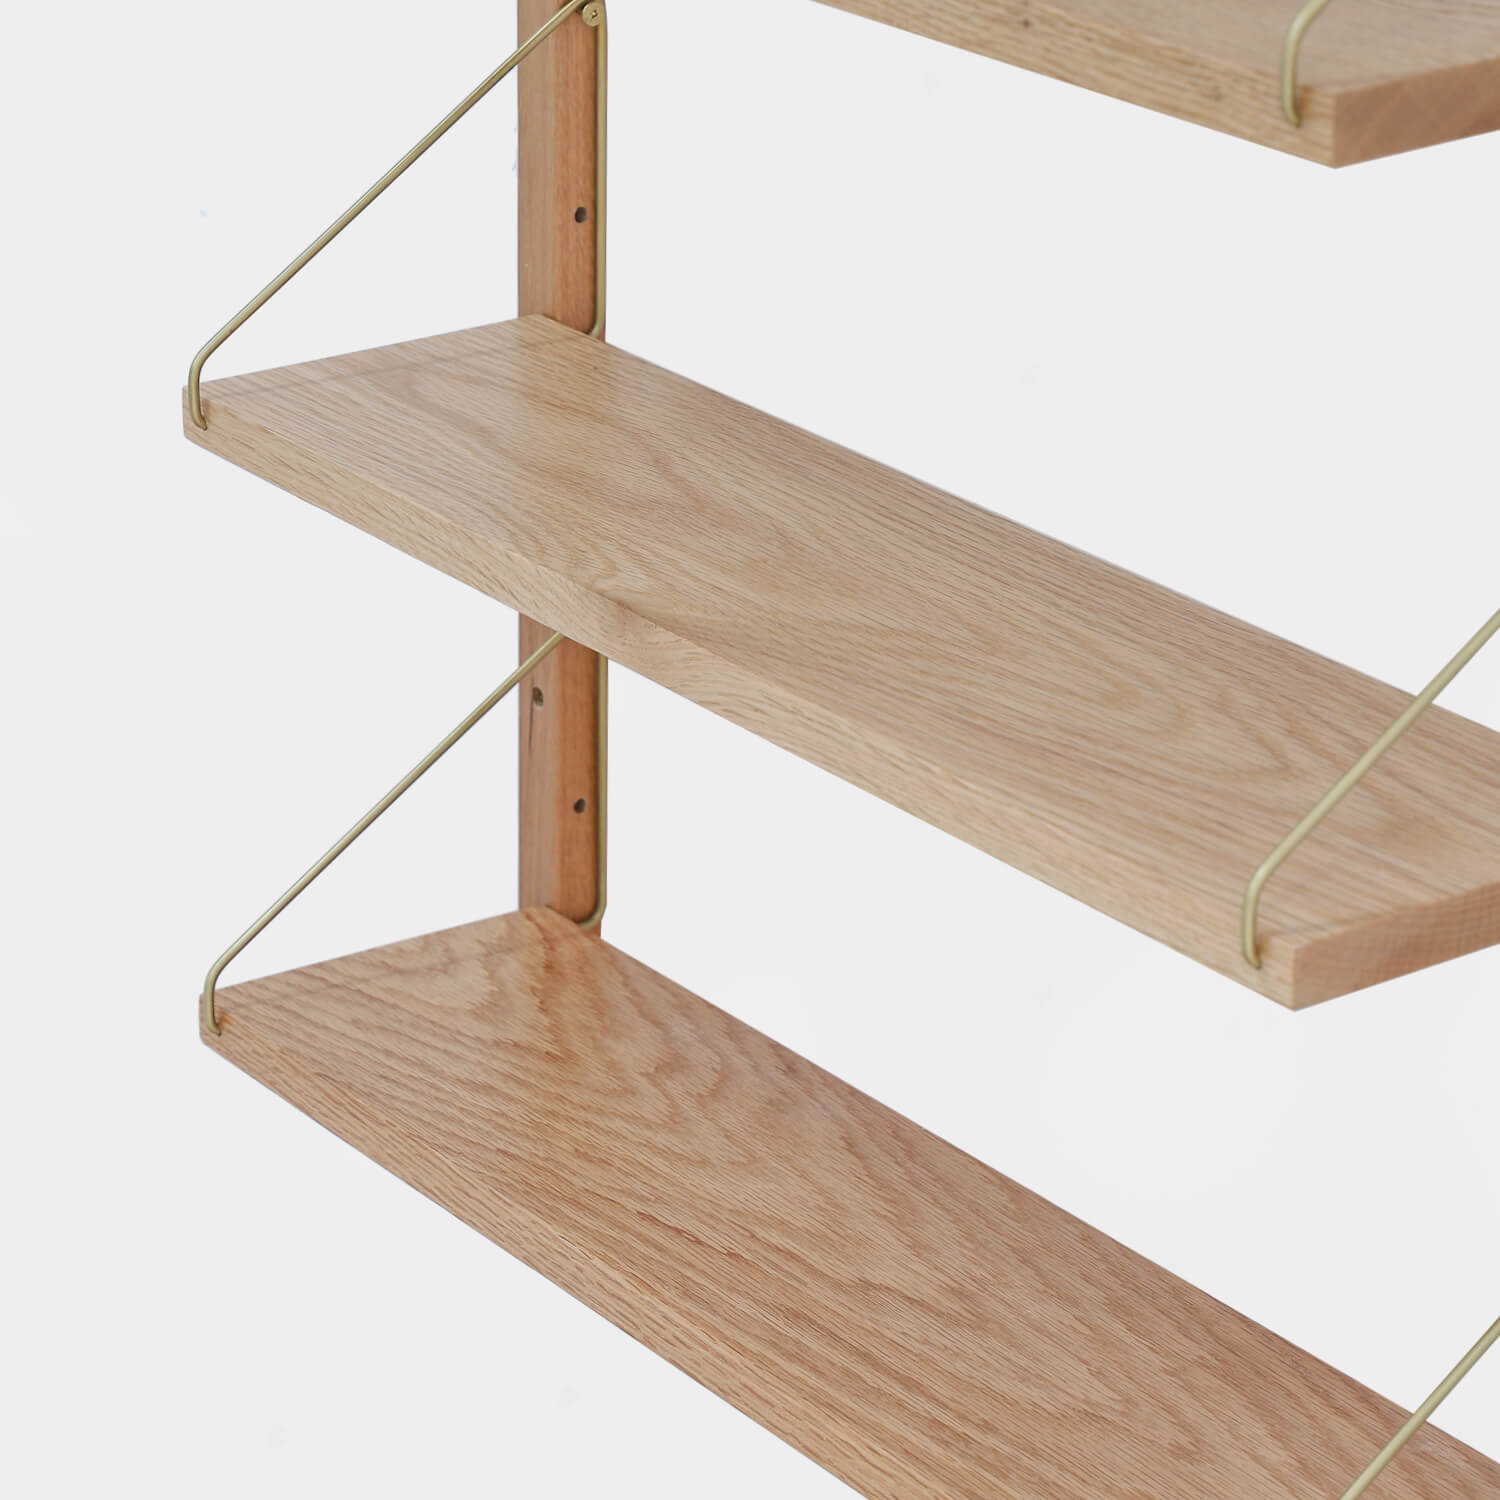 Multi-Tier Wall Flexible Display Shelf Unit Rack made of solid wood with a rich grain pattern